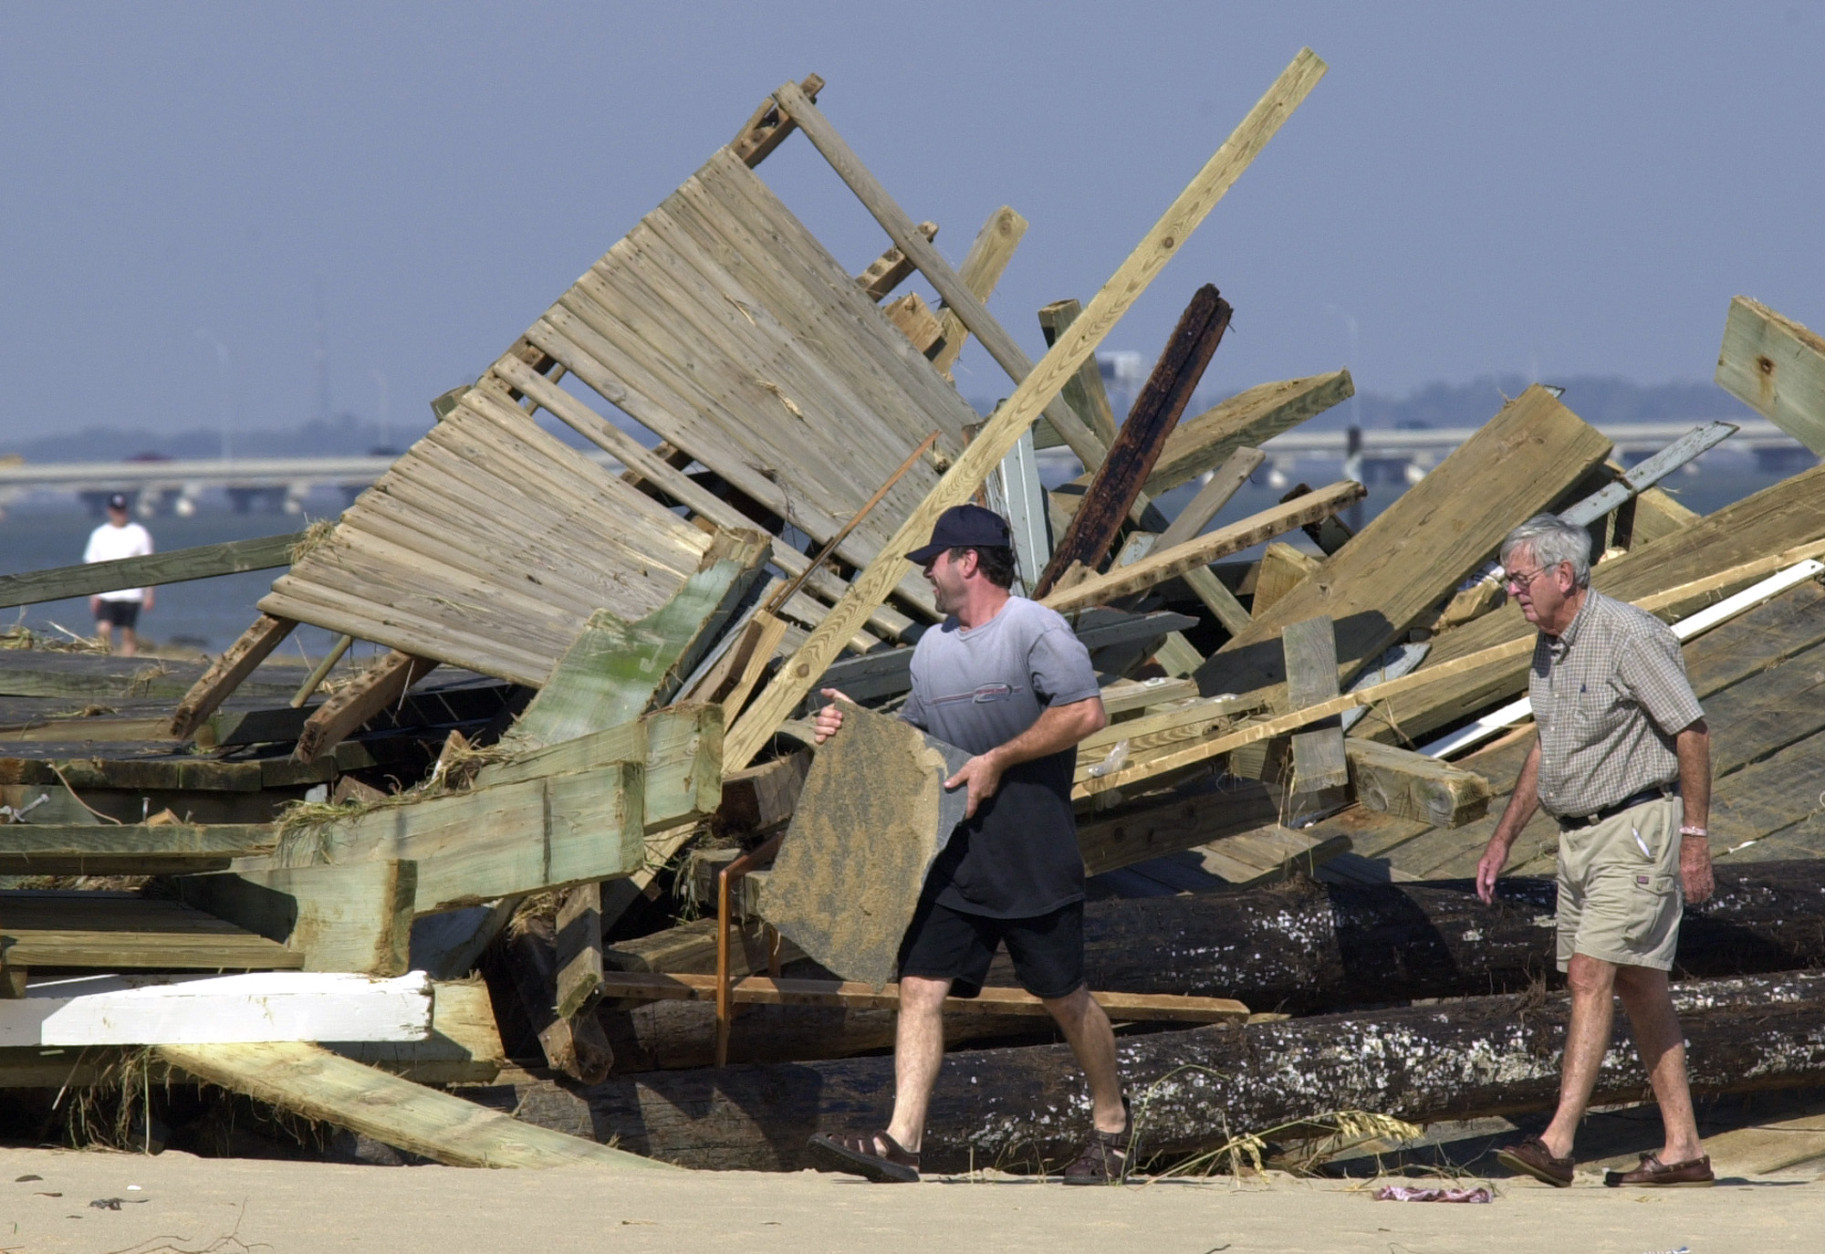 Local residents walk around a section of Harrison fishing pier that washed ashore on the beach in the Ocean View area of Norfolk, Va., Friday Sept. 19, 2003. The pier was built in the 1940's and was destroyed by Hurricane Isabel.  The storm battered the area leaving over 3.5 million people without power.   (AP Photo/Steve Helber)